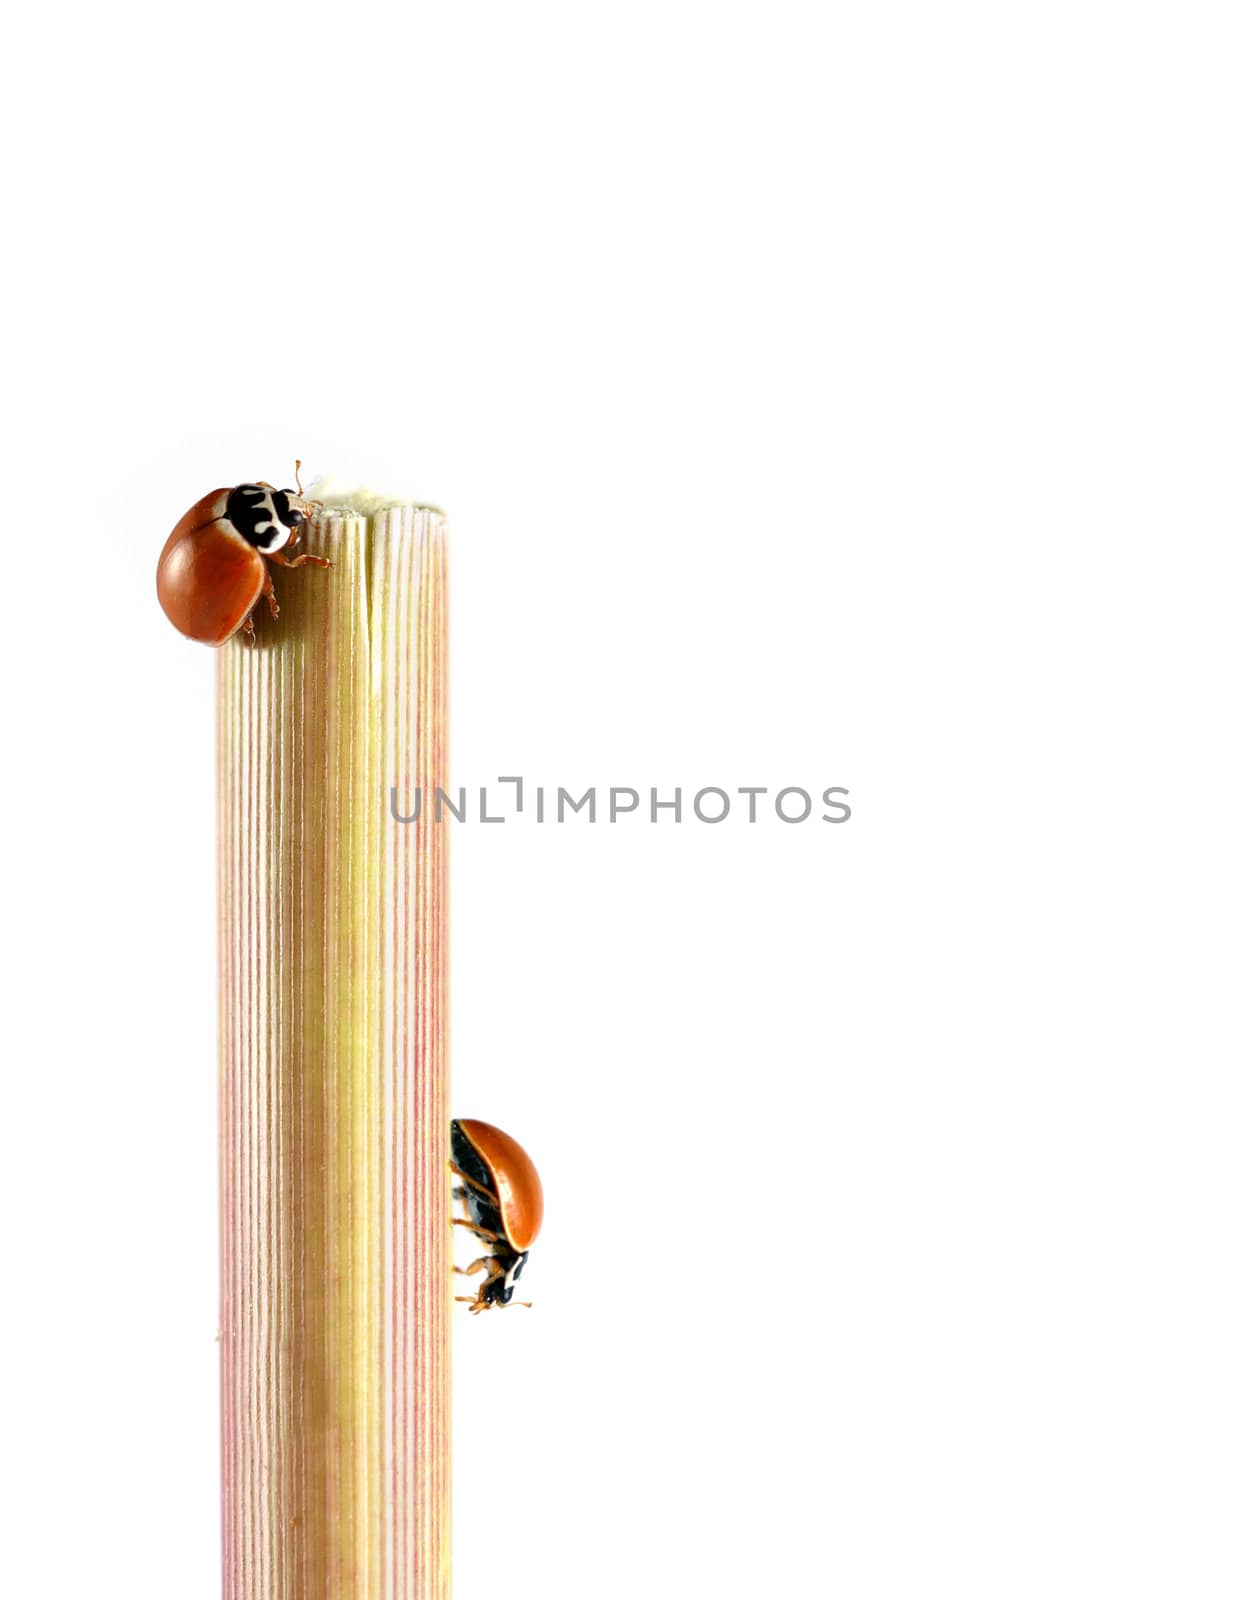 A macro shot of two ladybugs crawling on the stem of a plant. Shot was taken against a solid white background.